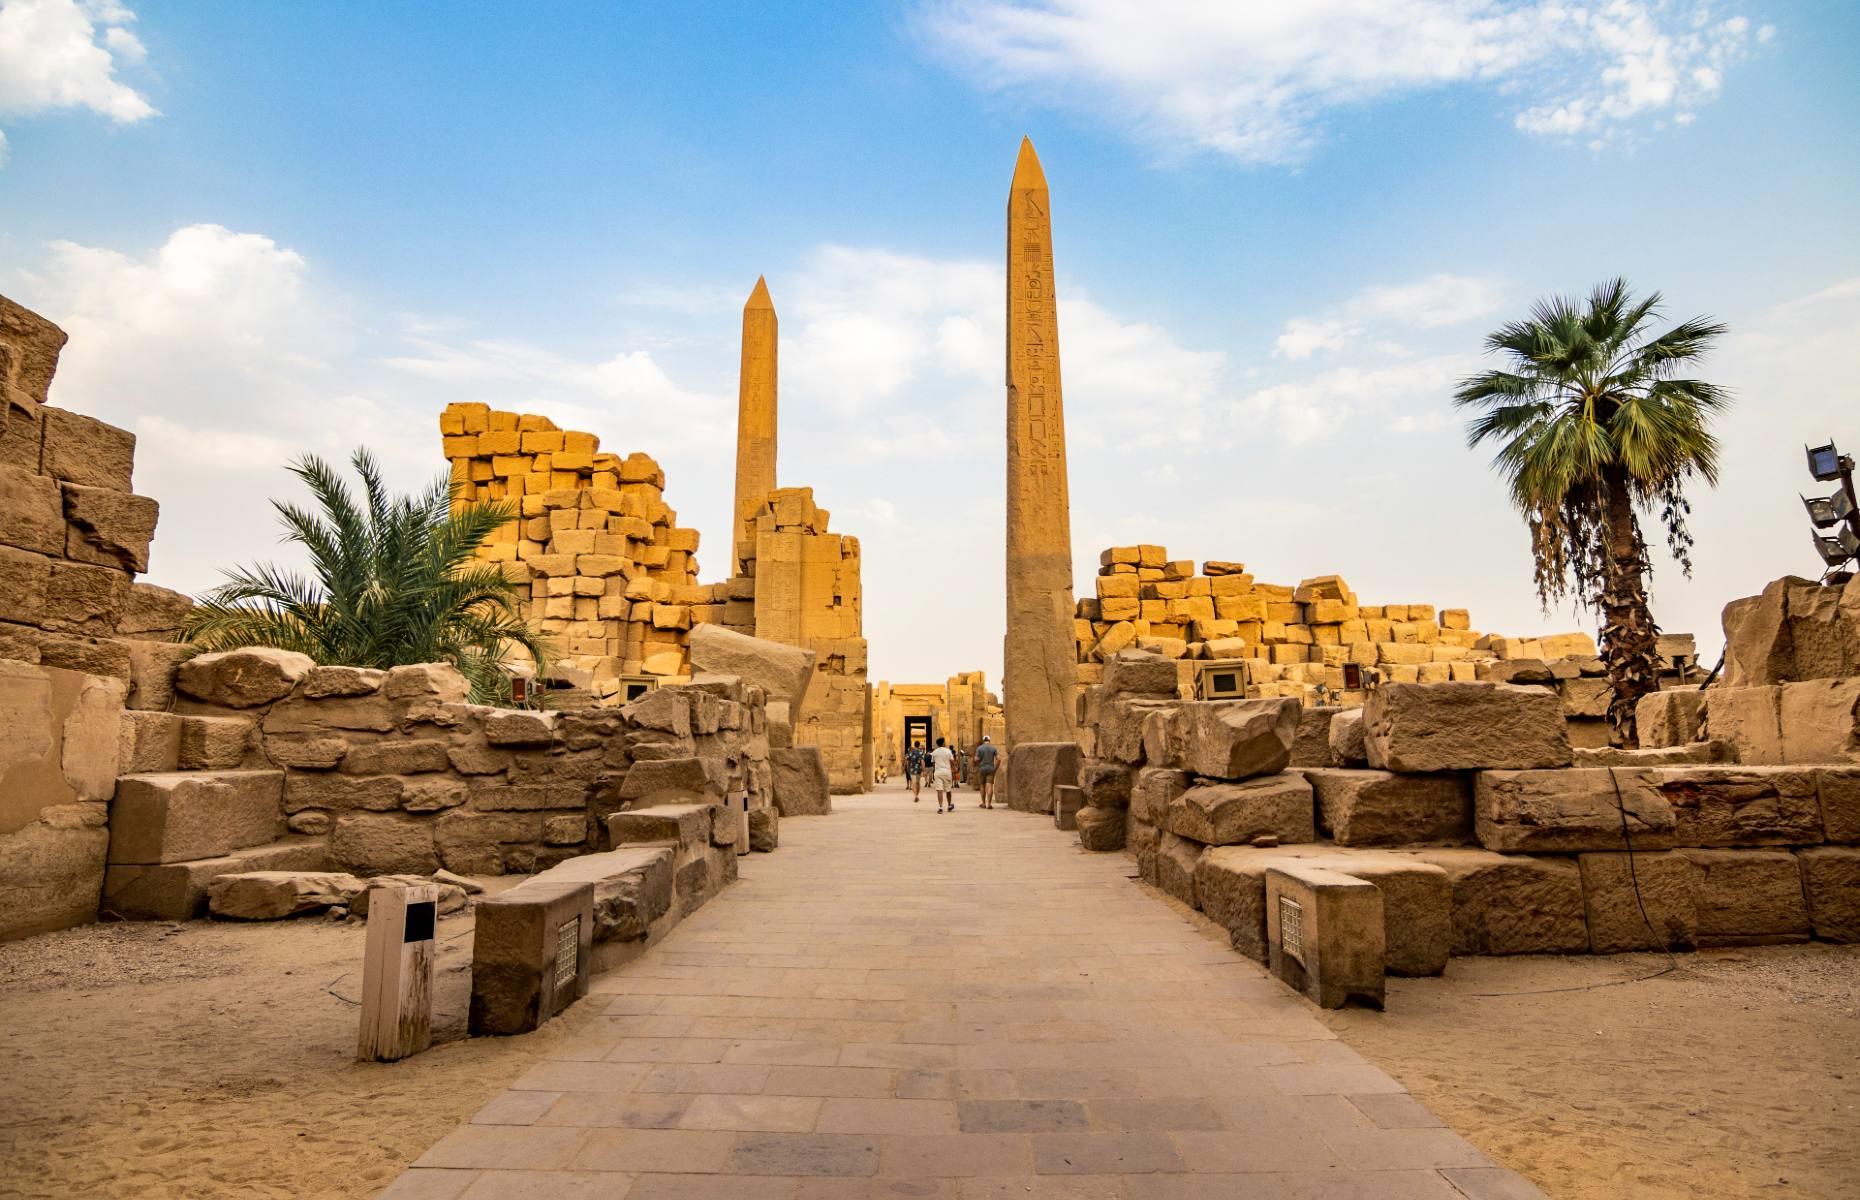 <p>Located in Luxor, the capital of ancient Egypt, Karnak is a fascinating temple complex that took more than 1,000 years to build. The bulk of construction work took place between the 12th and 20th Dynasties – at its peak, it was the largest and most significant sacred site in the country. Among the impressive structures to gaze at are the Temple of Amun-Re, which was believed to be where the prolific sun deity lived on Earth, and the Great Hypostyle Hall, a jaw-dropping site filled with intricately-carved columns. Allow three to four hours to walk around the entire complex.</p>